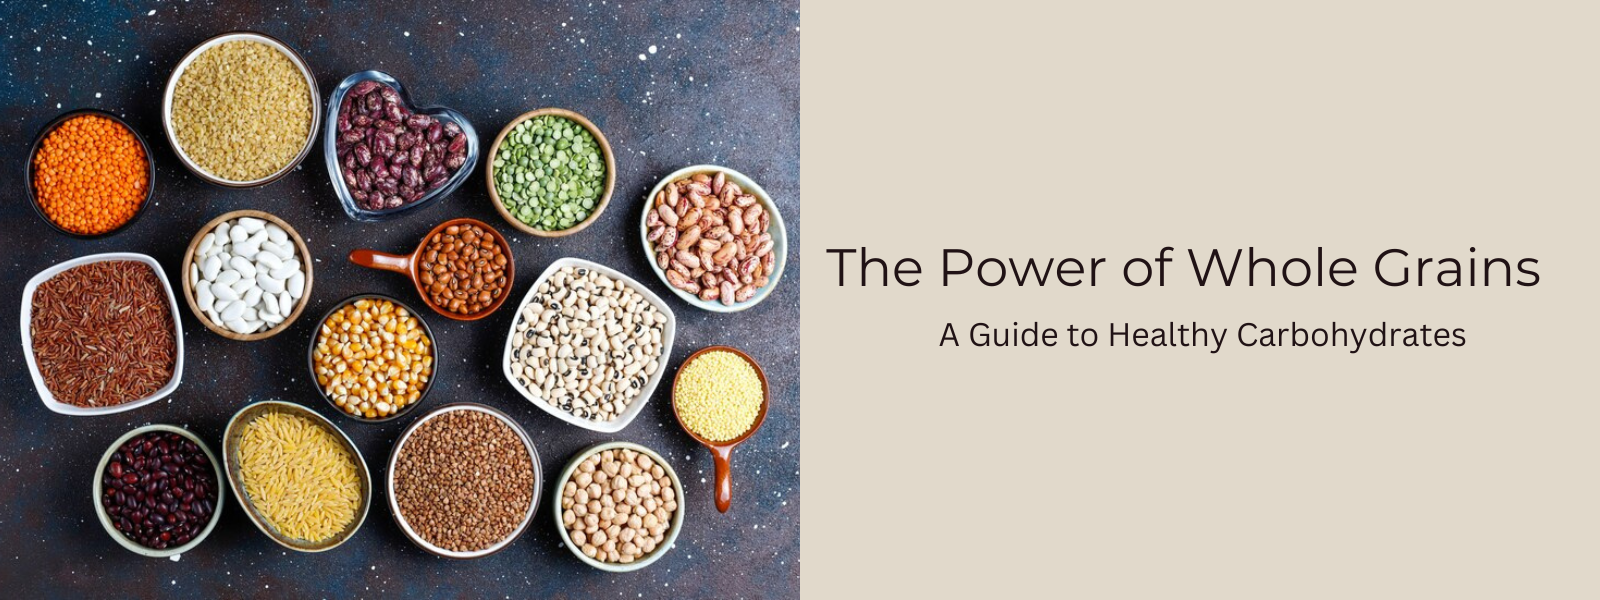 The Power of Whole Grains: A Guide to Healthy Carbohydrates